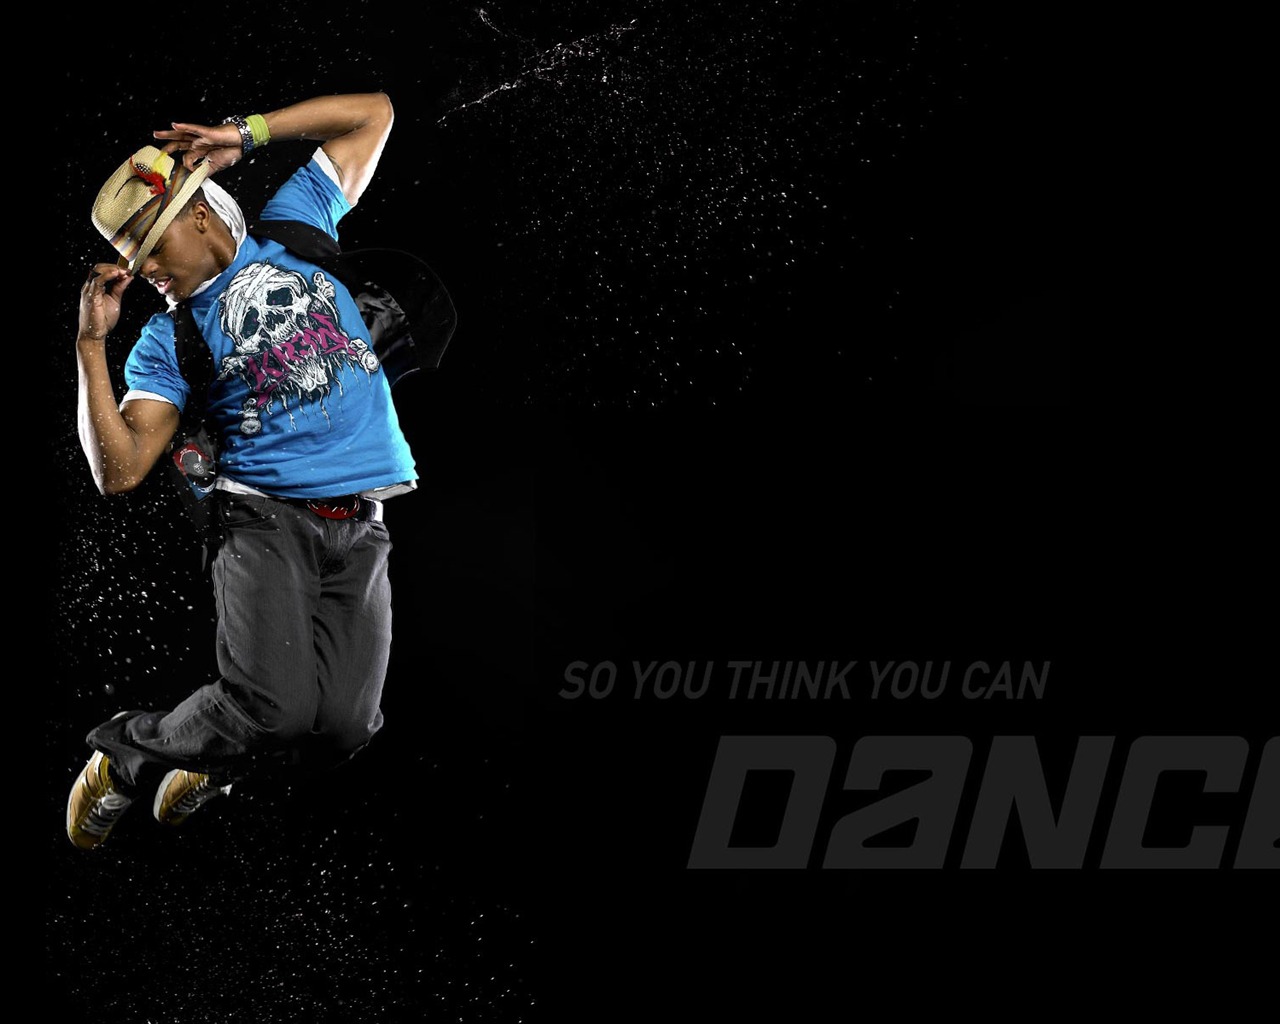 So You Think You Can Dance Wallpaper (1) #20 - 1280x1024